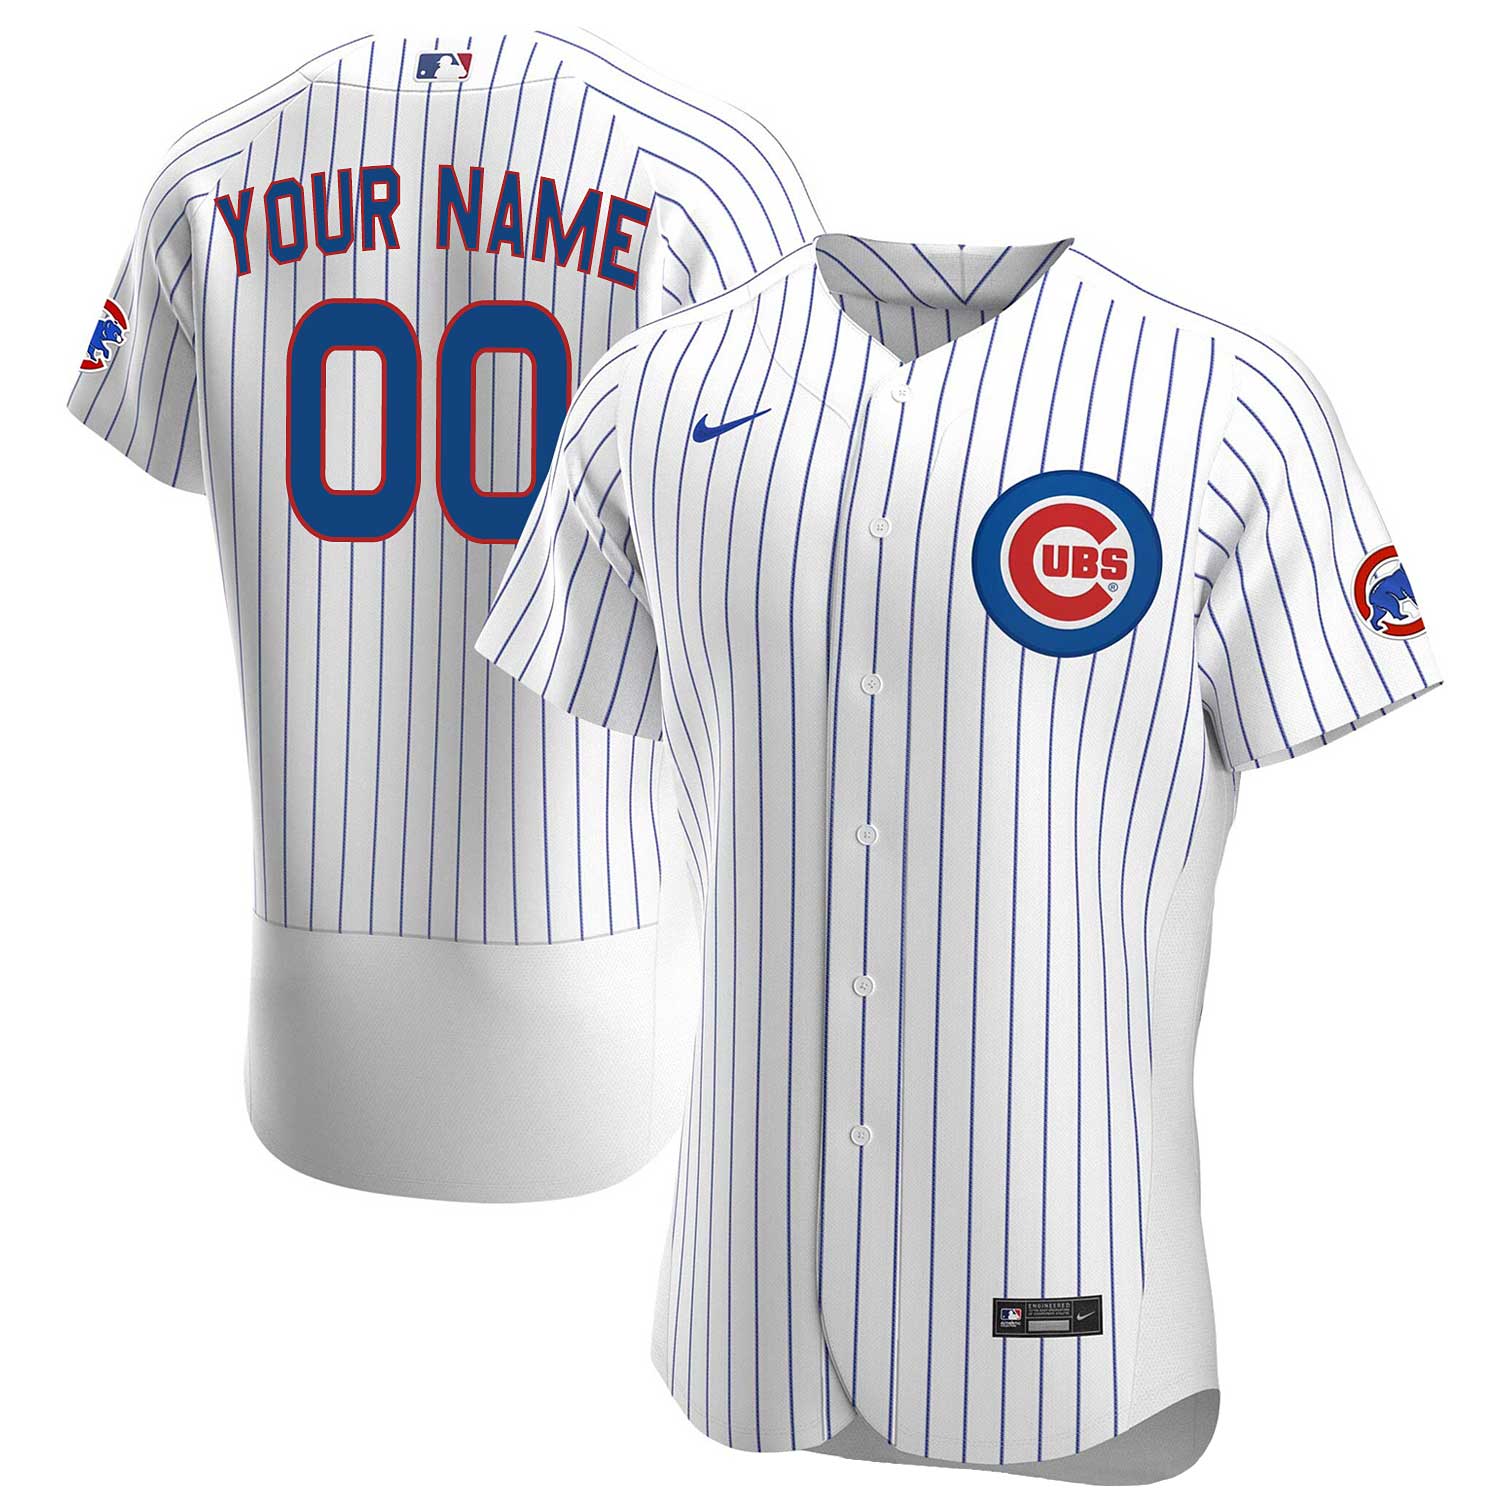 Chicago Cubs 2020 Official On-Field and Replica Nike Jerseys